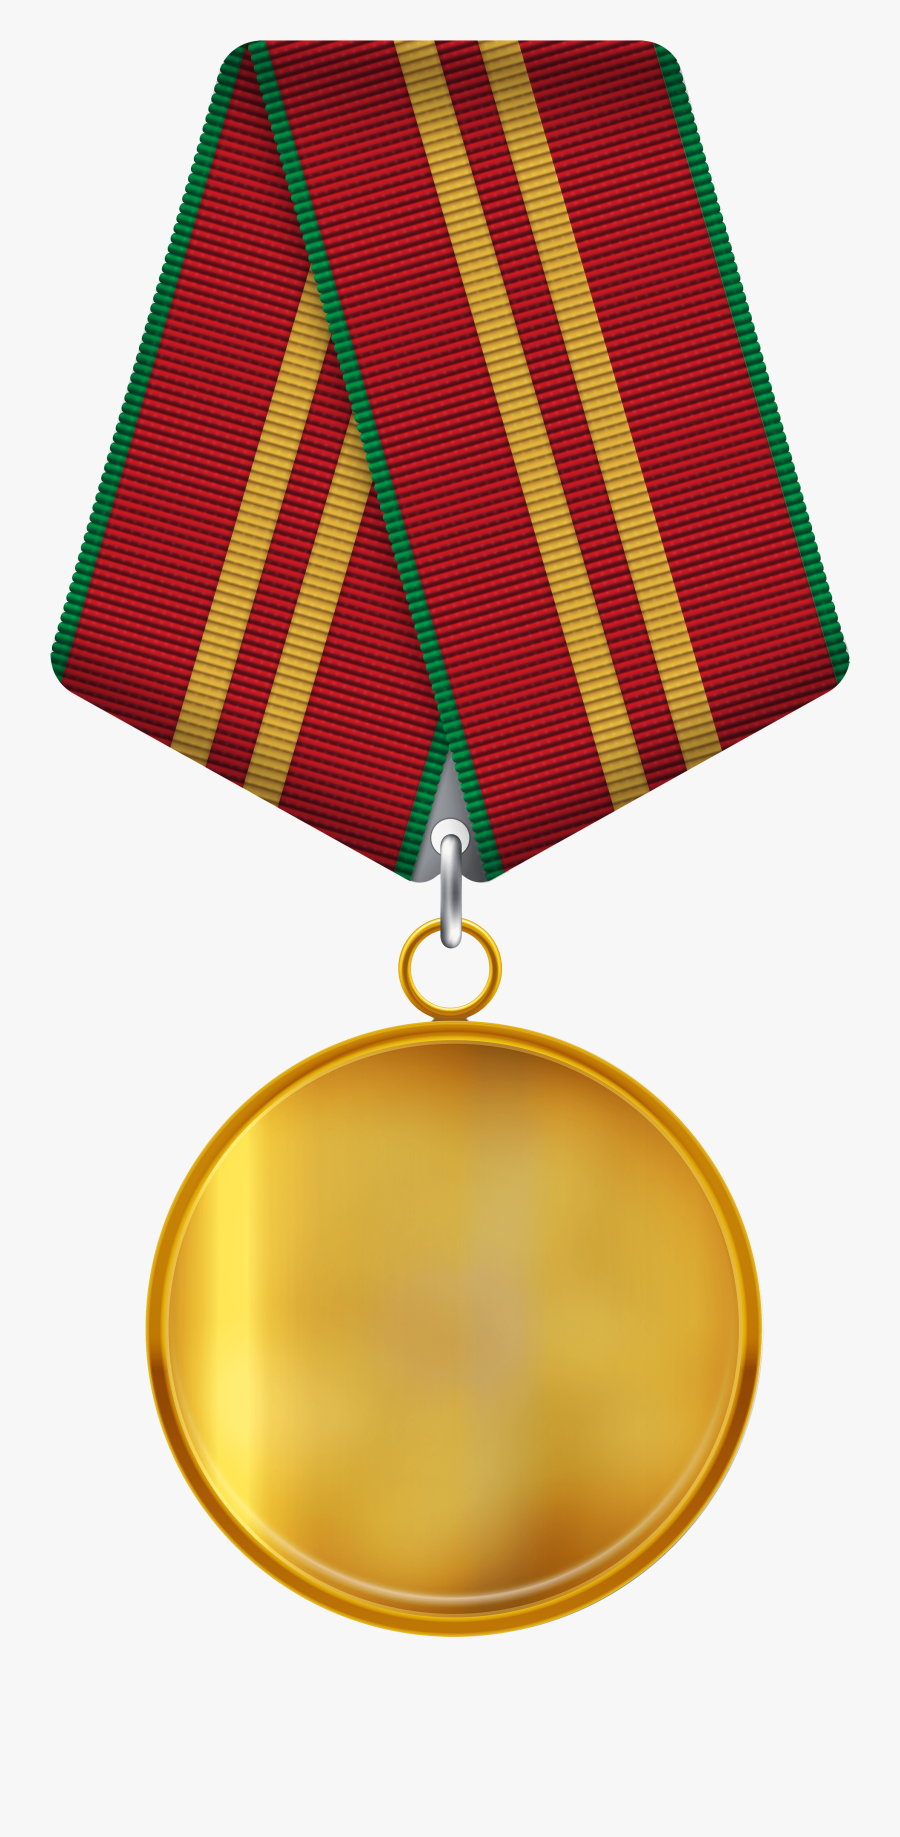 Medal Free Png Clip Art Image - Medals And Ribbon Png, Transparent Clipart